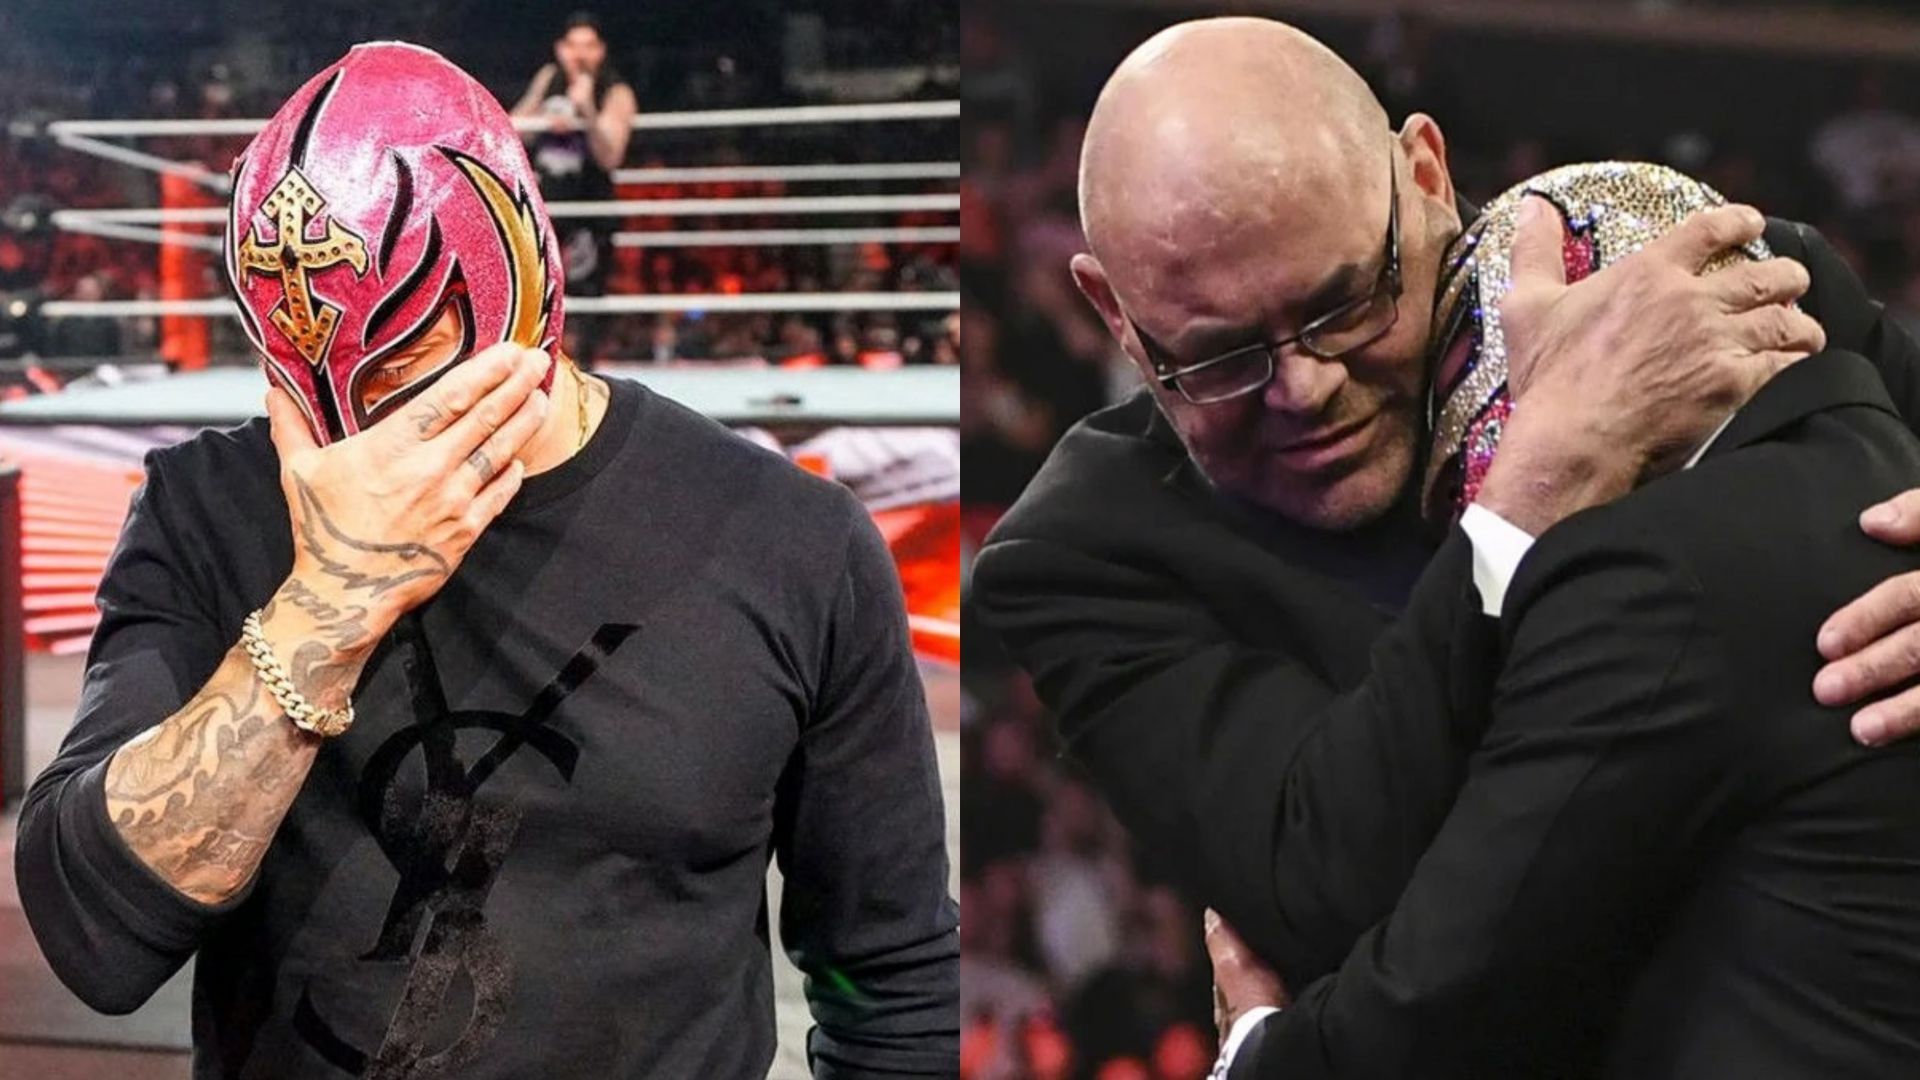 WWE Hall of Famer Rey Mysterio and Konnan are close friends